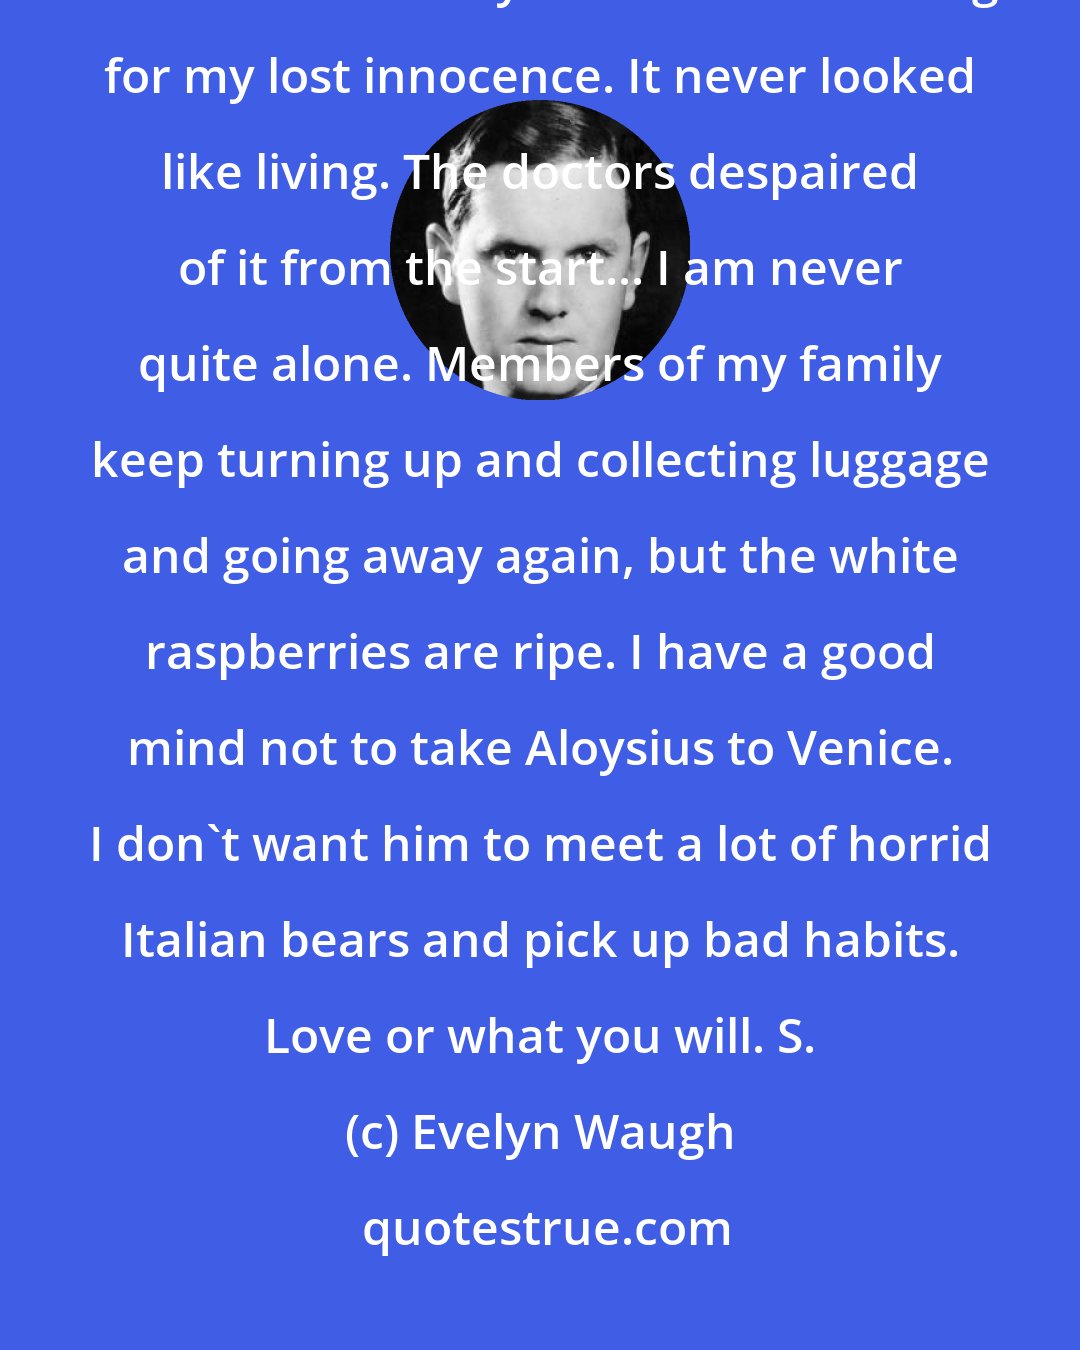 Evelyn Waugh: Dearest Charles-- I found a box of this paper at the back of a bureau so I must write to you as I am mourning for my lost innocence. It never looked like living. The doctors despaired of it from the start... I am never quite alone. Members of my family keep turning up and collecting luggage and going away again, but the white raspberries are ripe. I have a good mind not to take Aloysius to Venice. I don't want him to meet a lot of horrid Italian bears and pick up bad habits. Love or what you will. S.